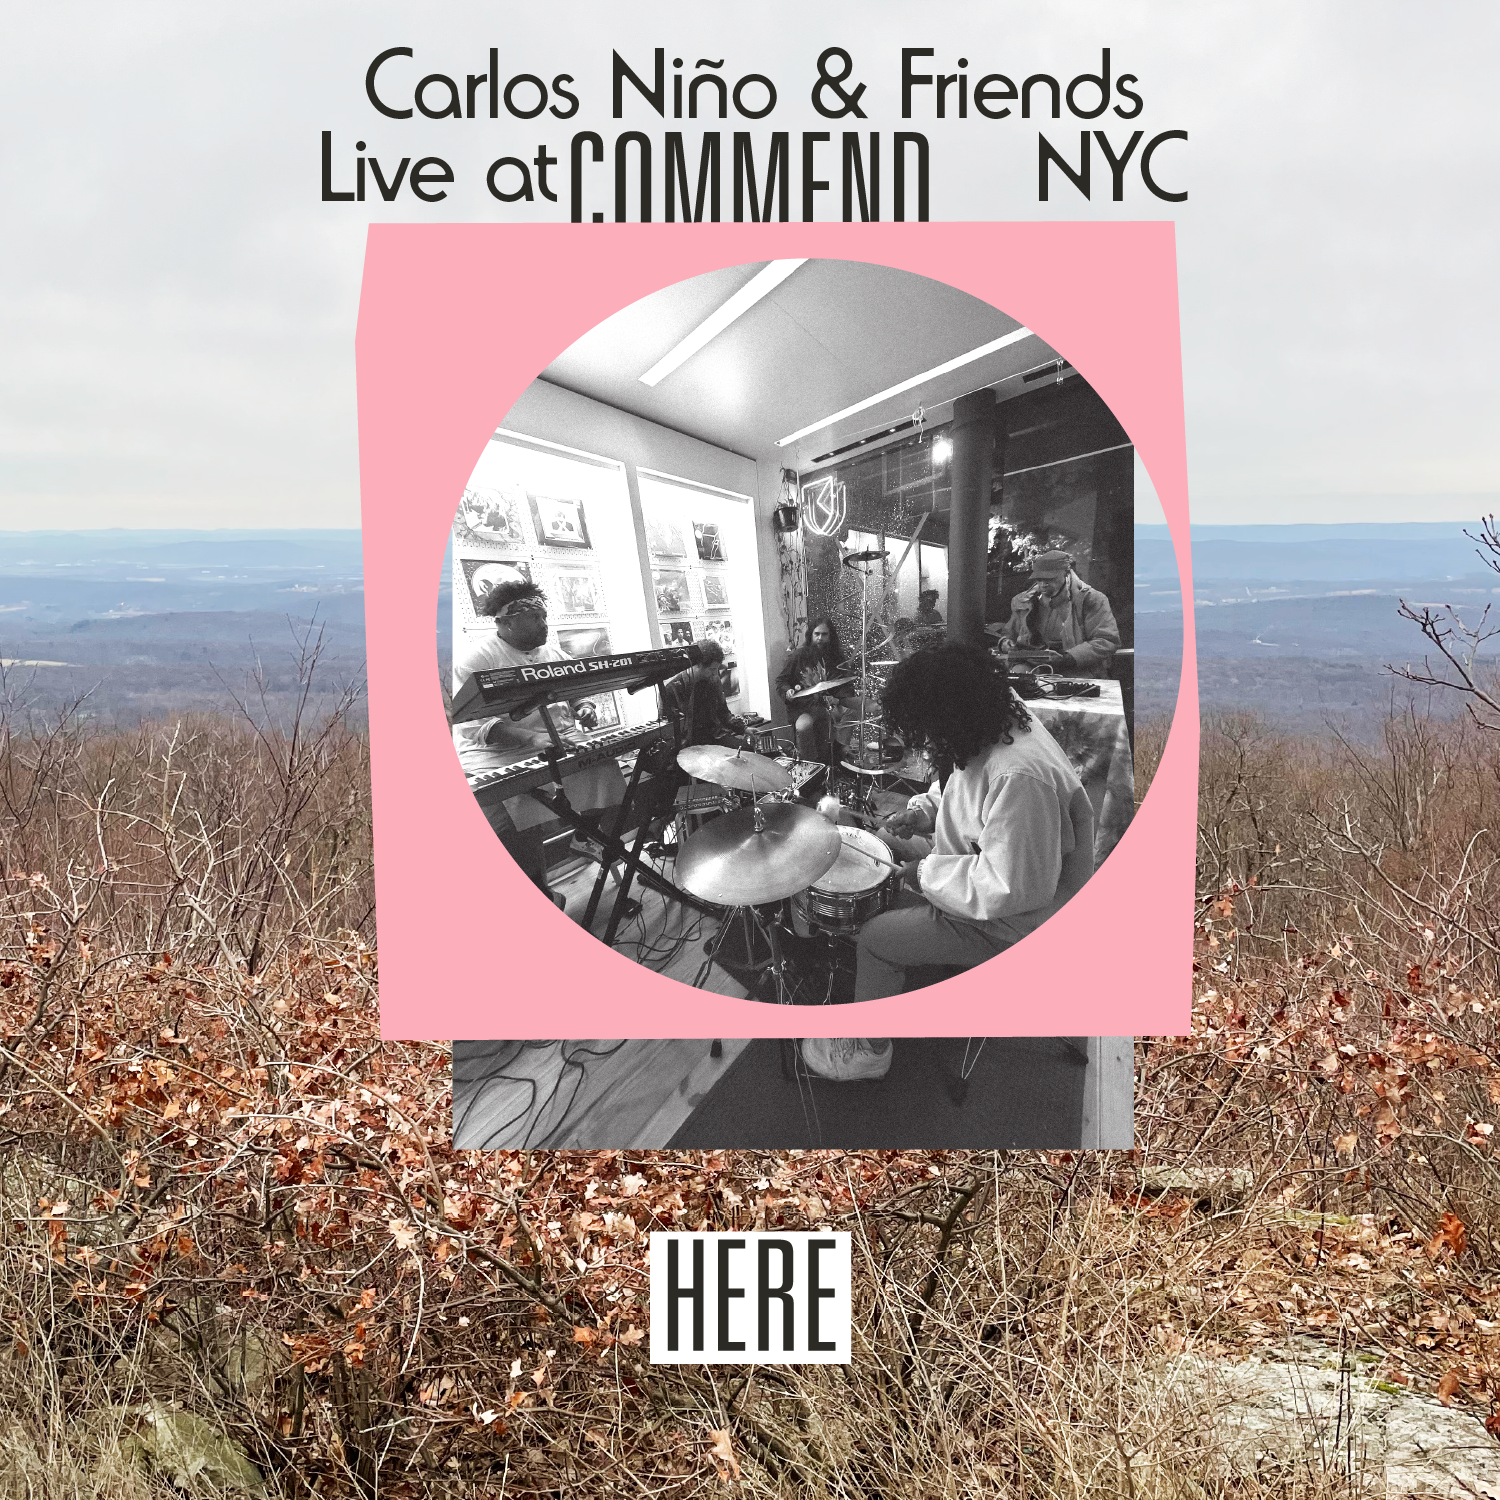 Image for Carlos Niño & Friends – Live at Commend, NYC